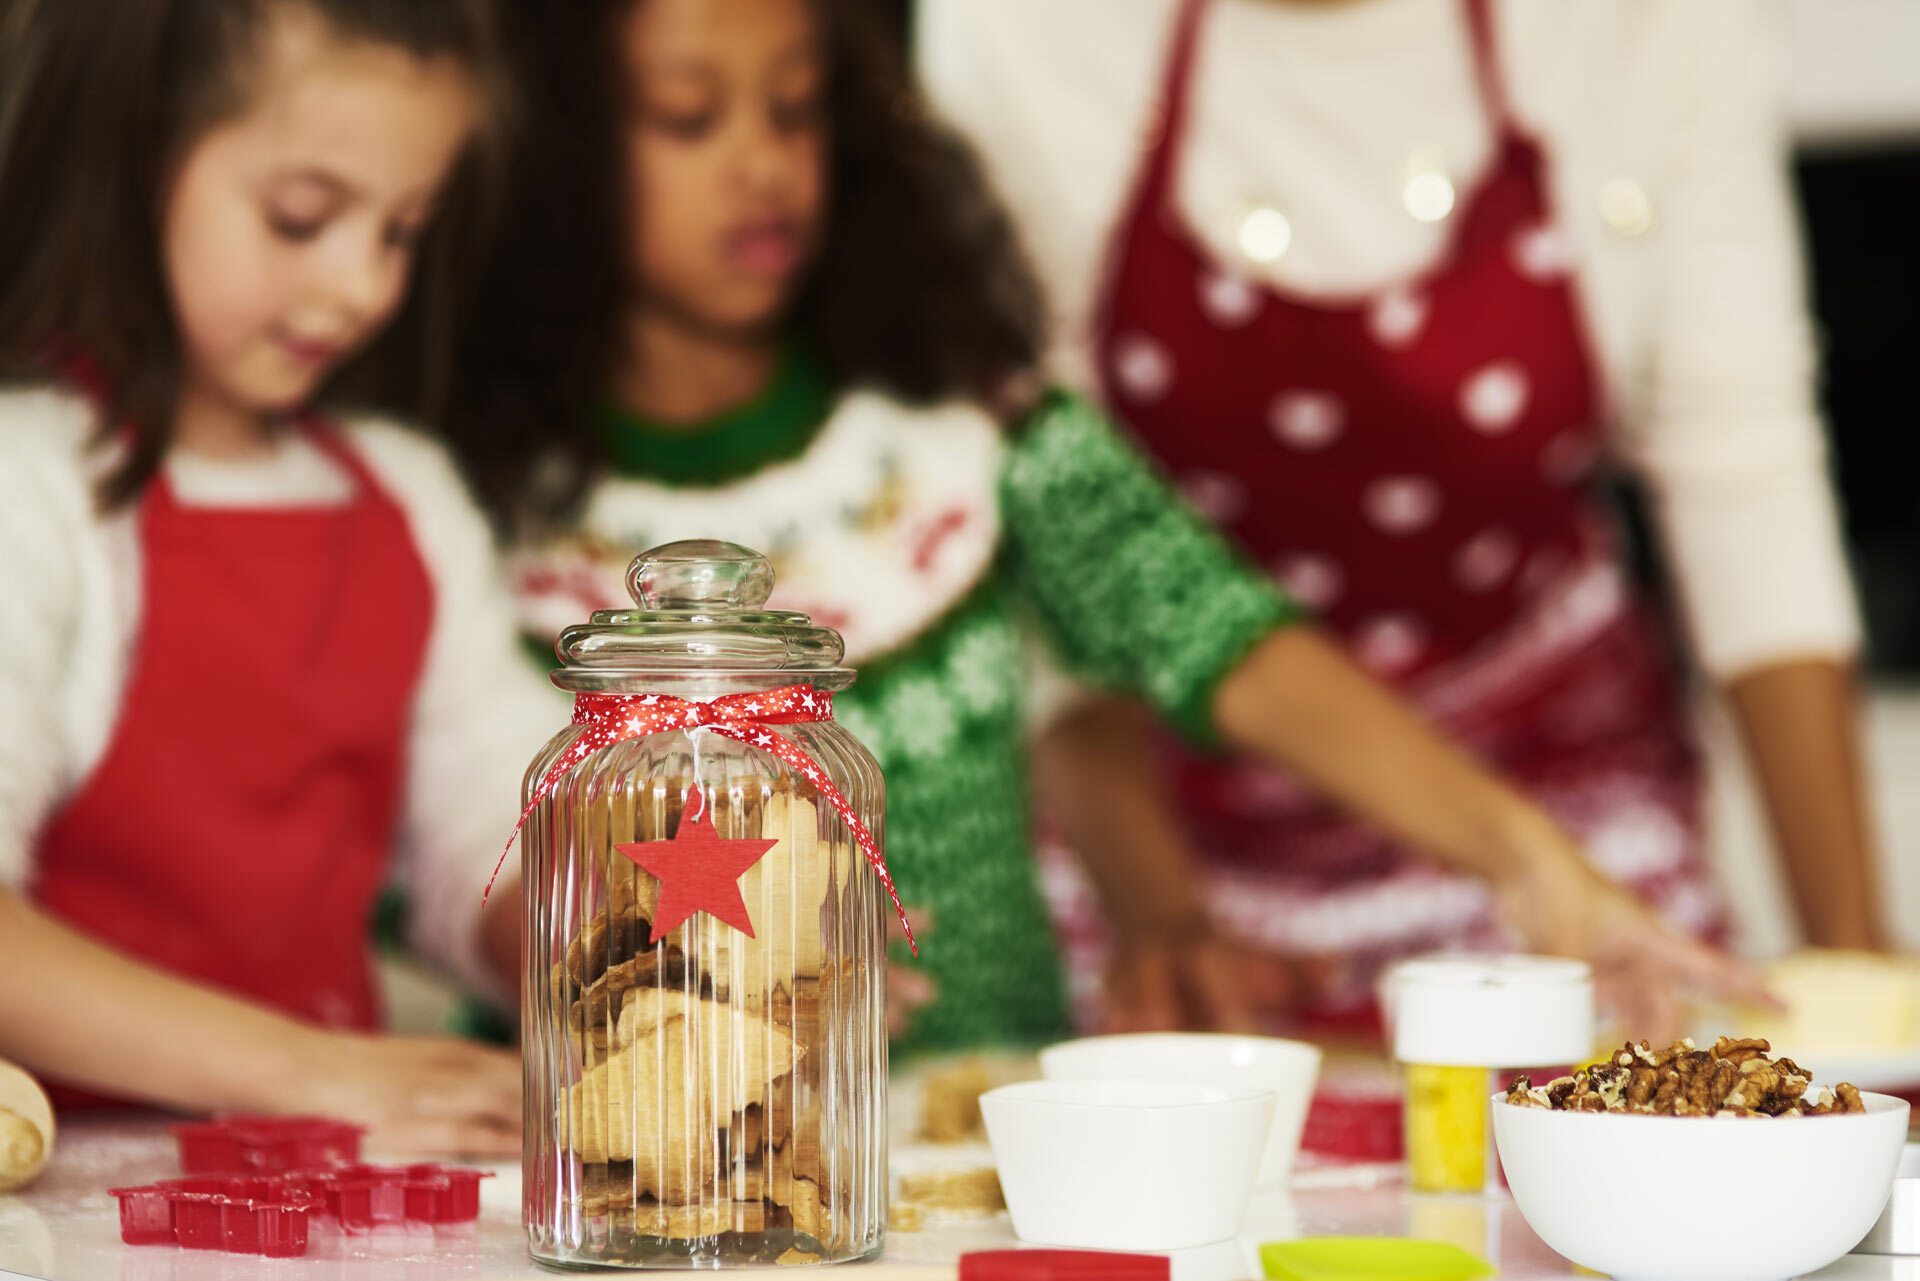 It’s Time to Start Your Own Family Christmas Traditions